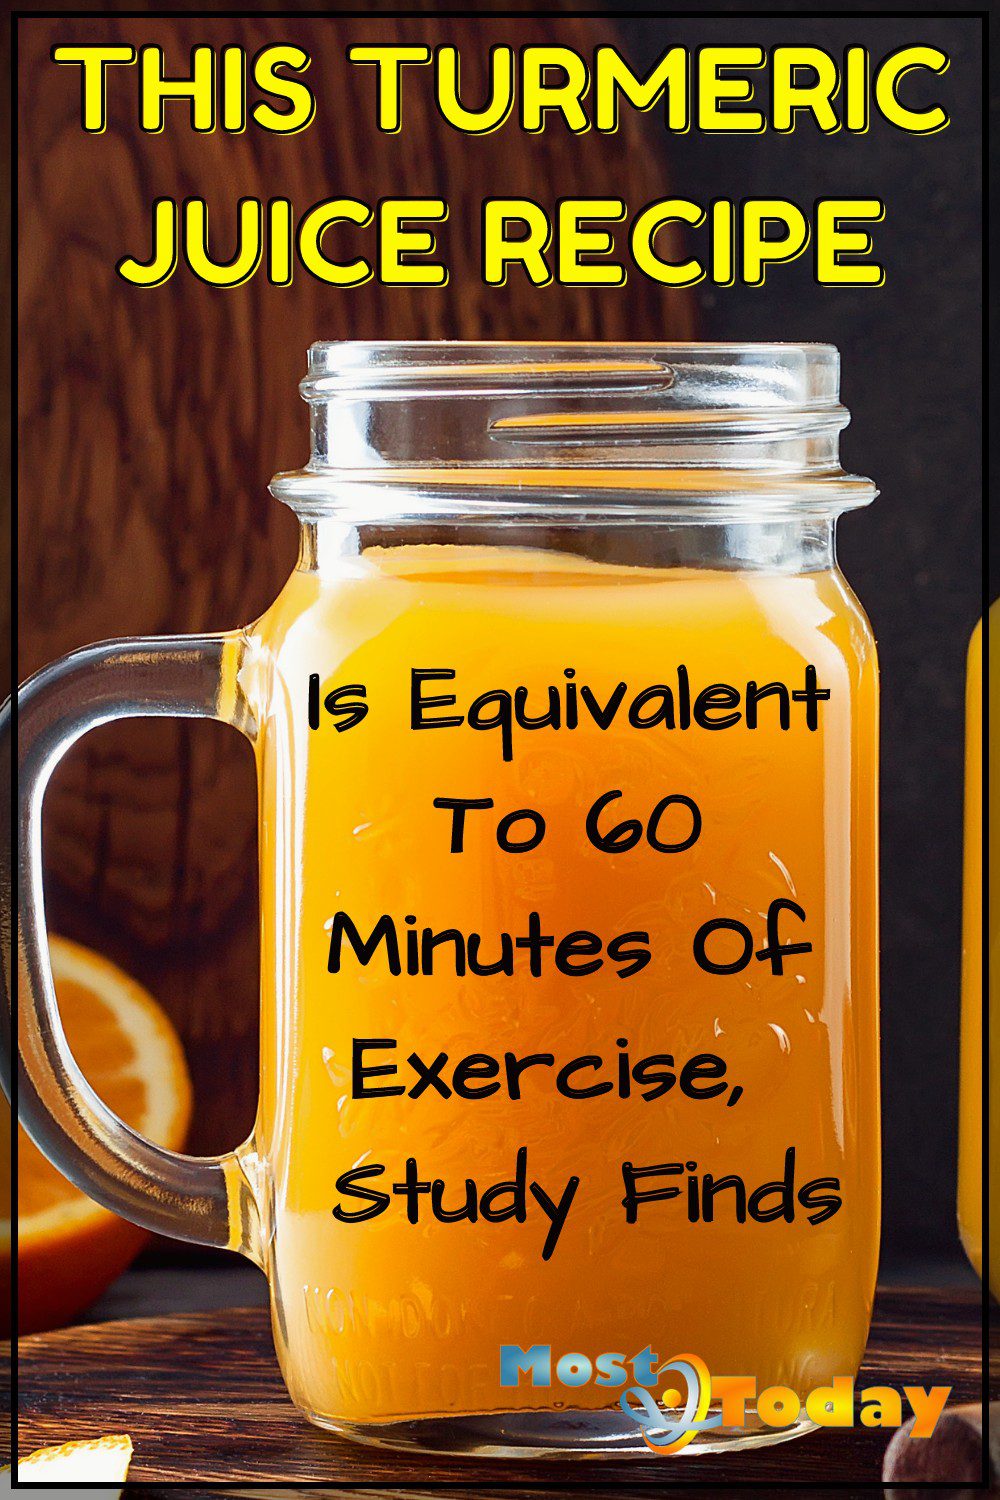 Turmeric Juice Recipe Is Equivalent To 60 Minutes Of Exercise